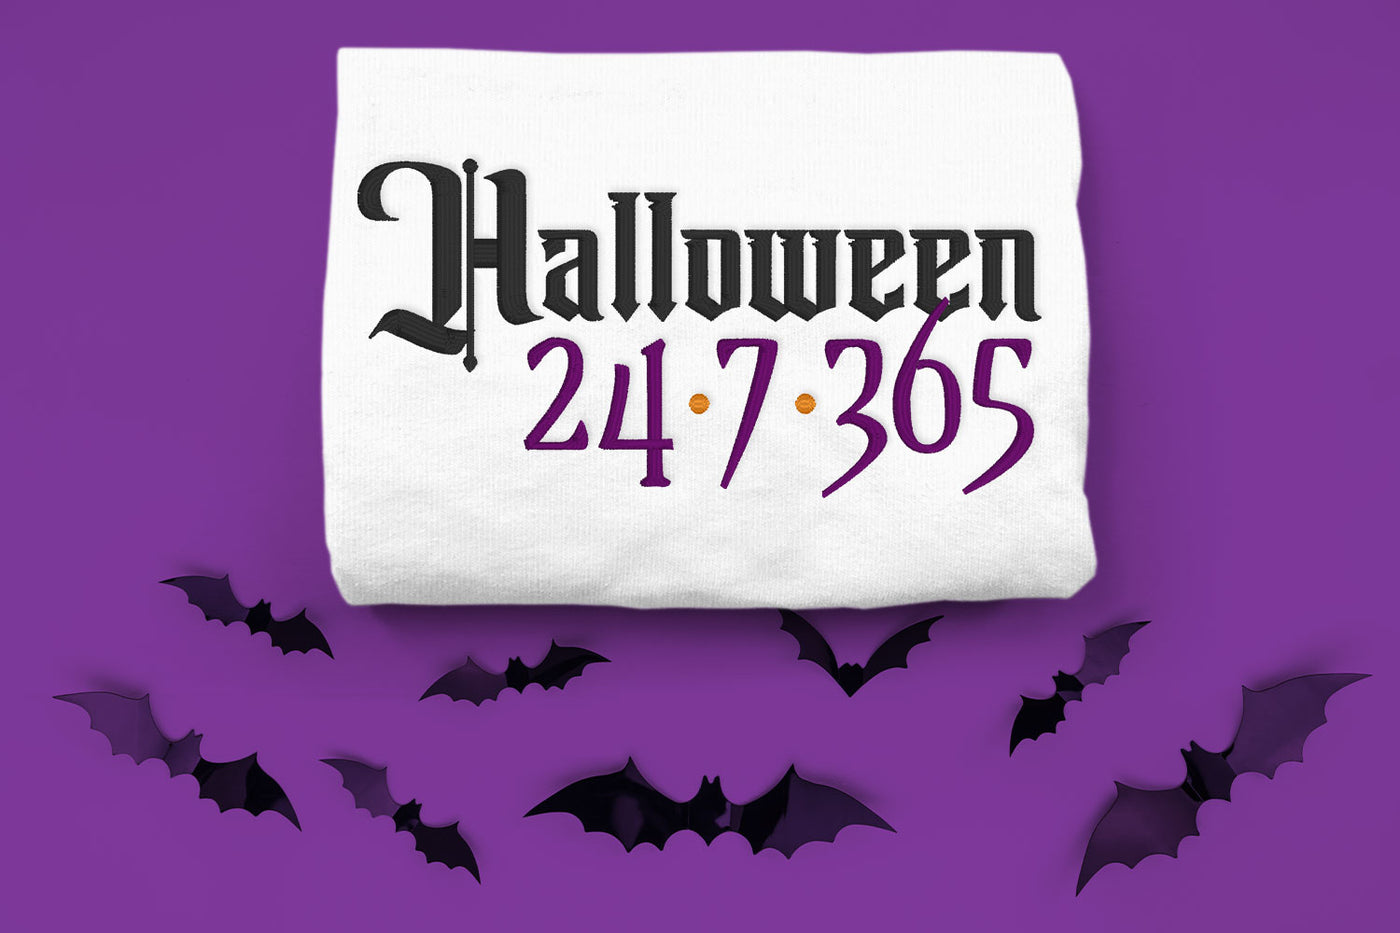 Halloween 24-7, 365 embroidery design file